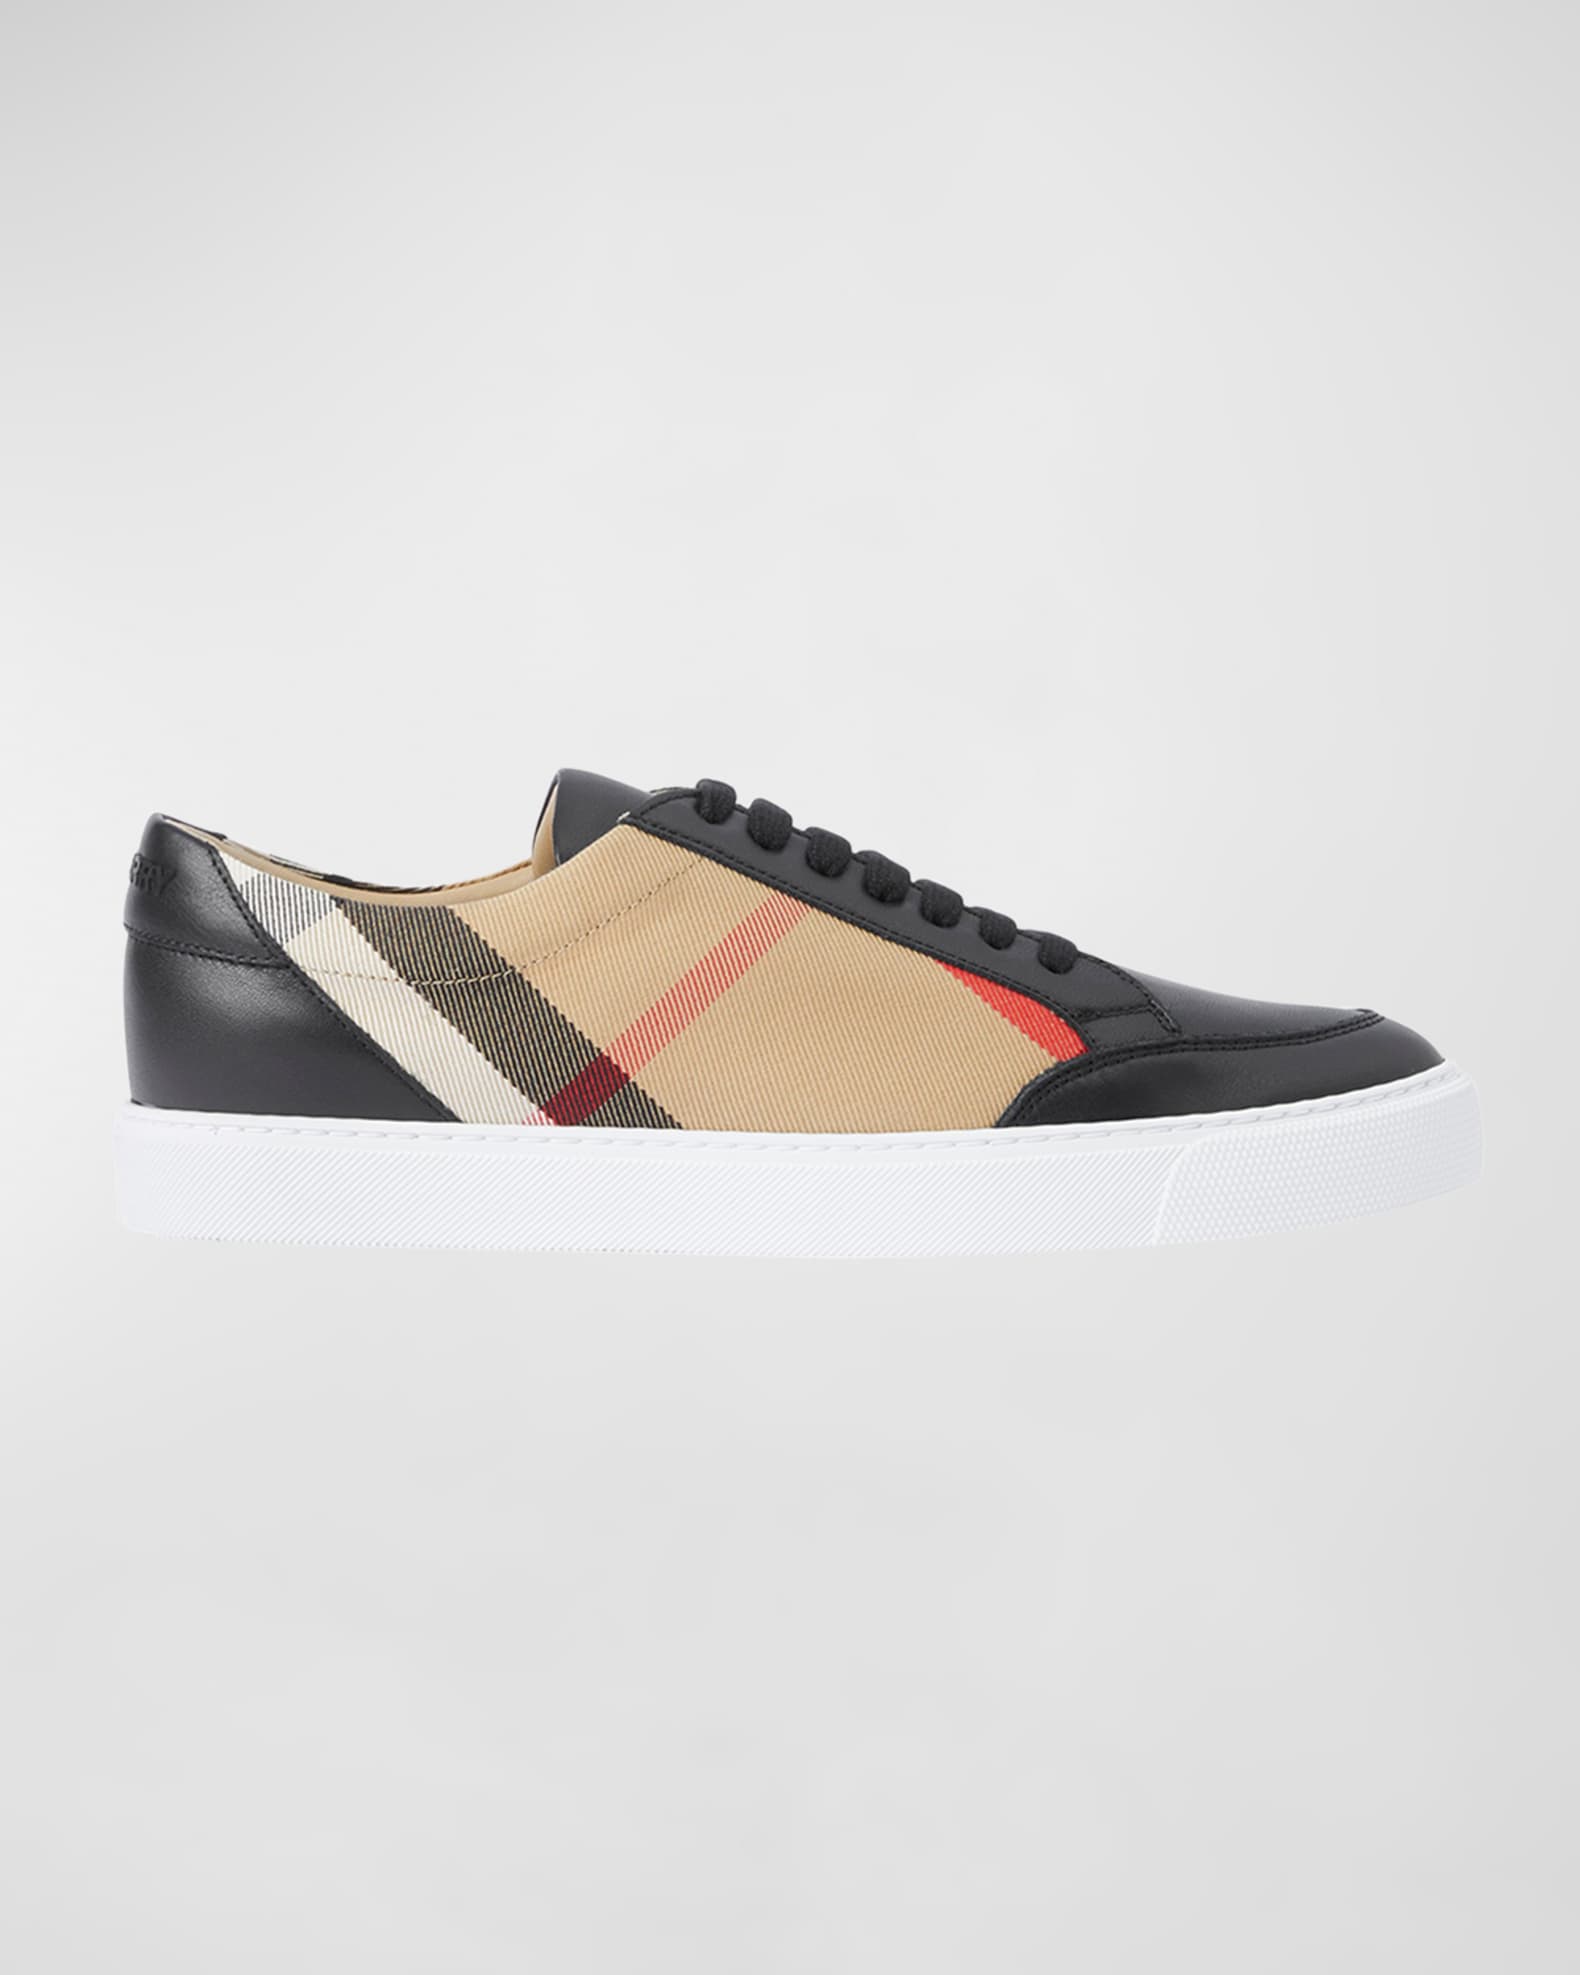 ysl envelope medium Limited Special Sales and Special Offers - Women's &  Men's Sneakers & Sports Shoes - Shop Athletic Shoes Online